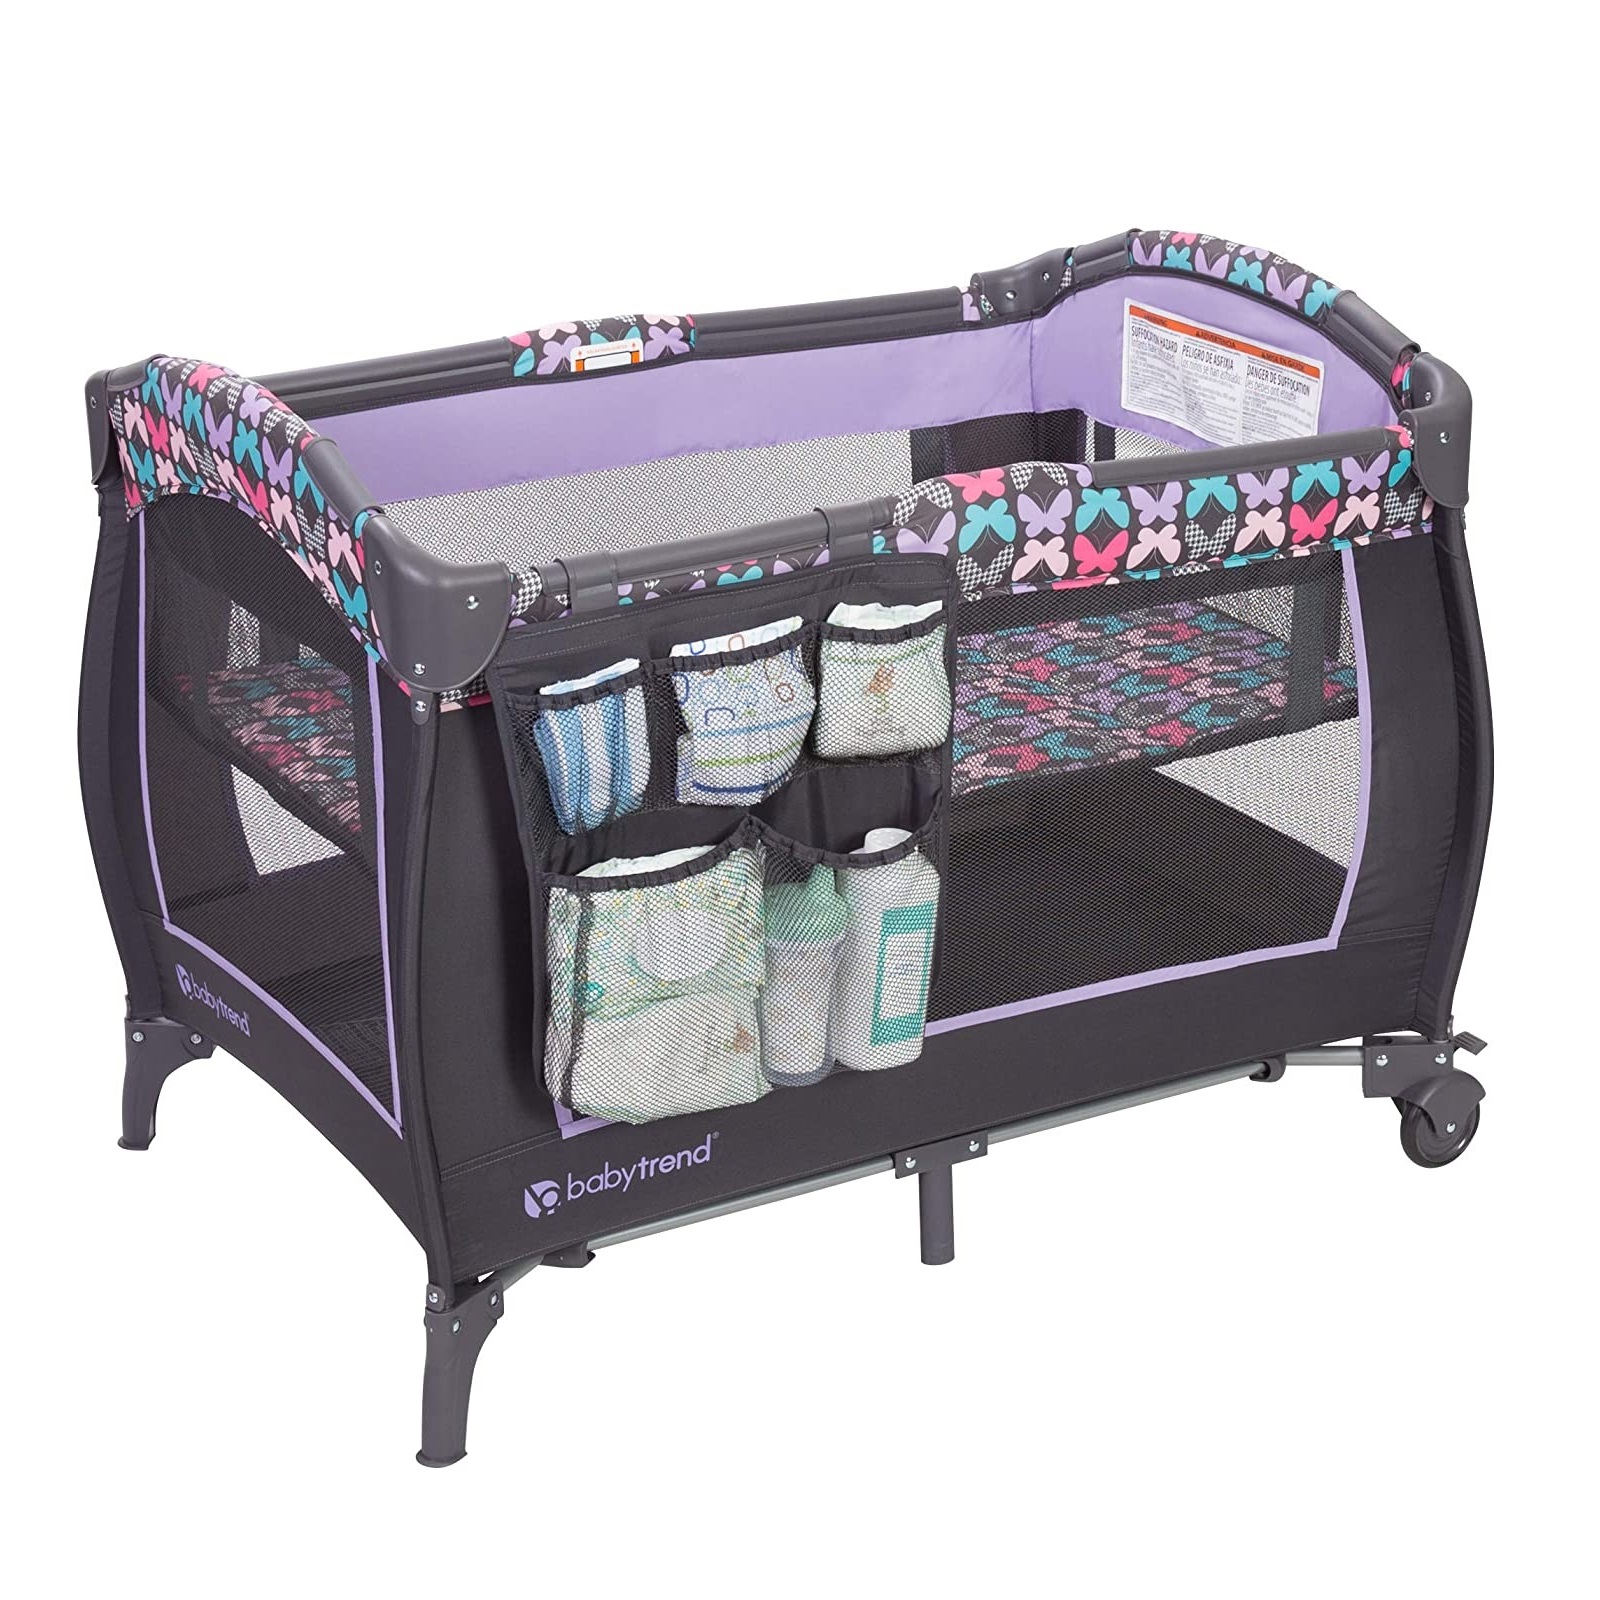 baby-fair Baby Trend Trend-E Nursery Center Playpen - Sophia + TOP-UP Available for Mattress